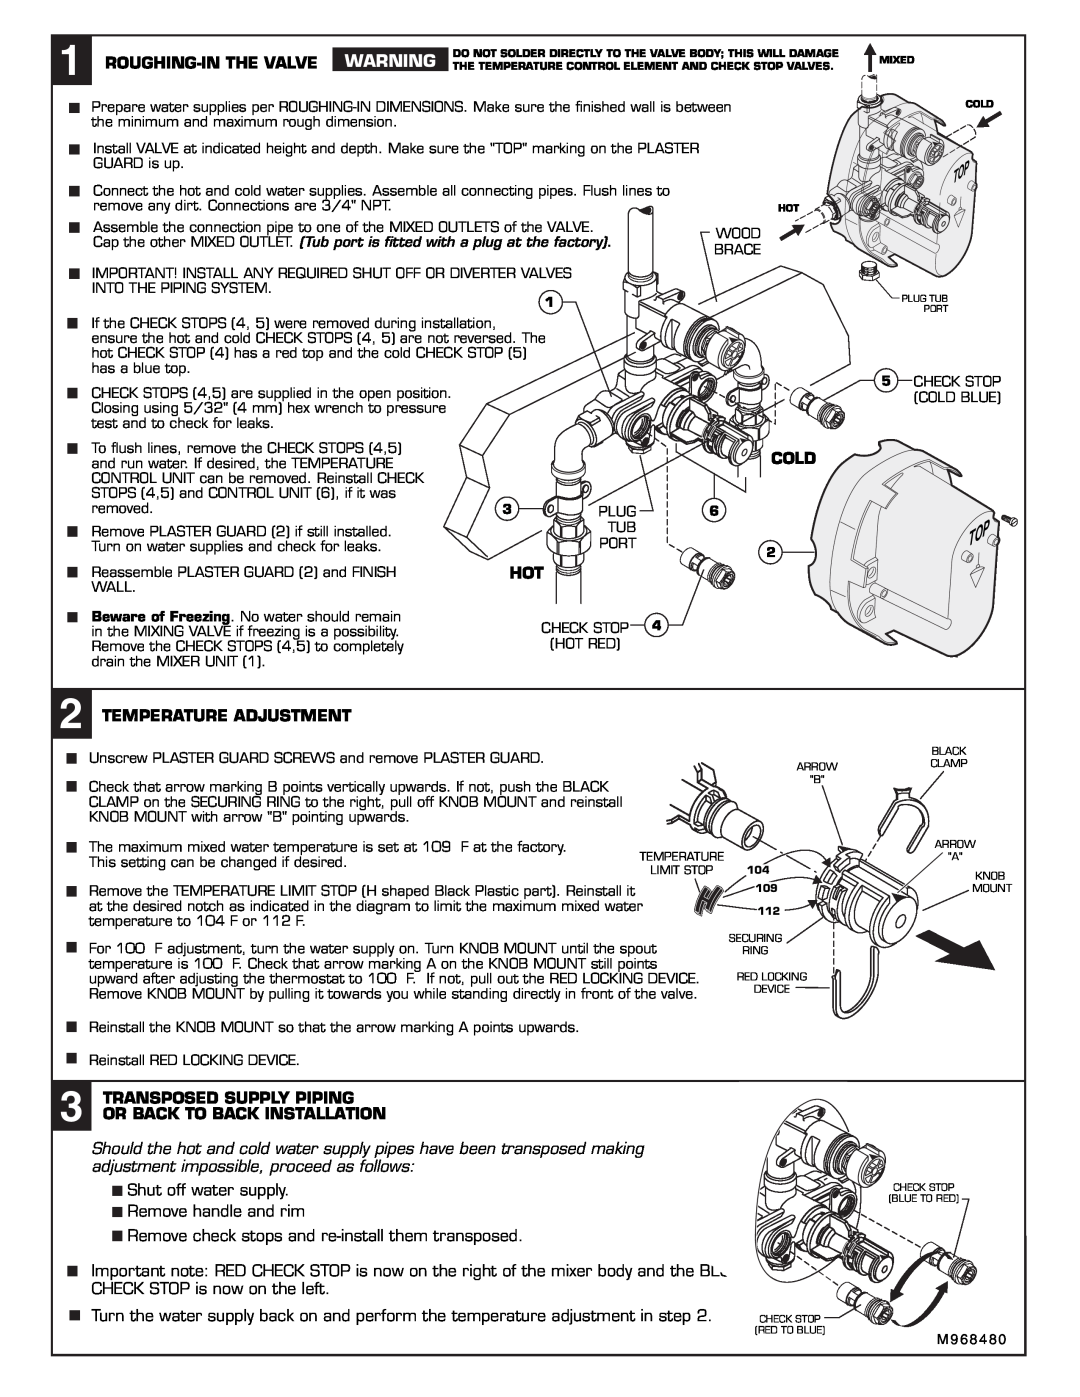 American Standard T050.210 installation instructions Roughing-In The Valve, Cold, Temperature Adjustment 